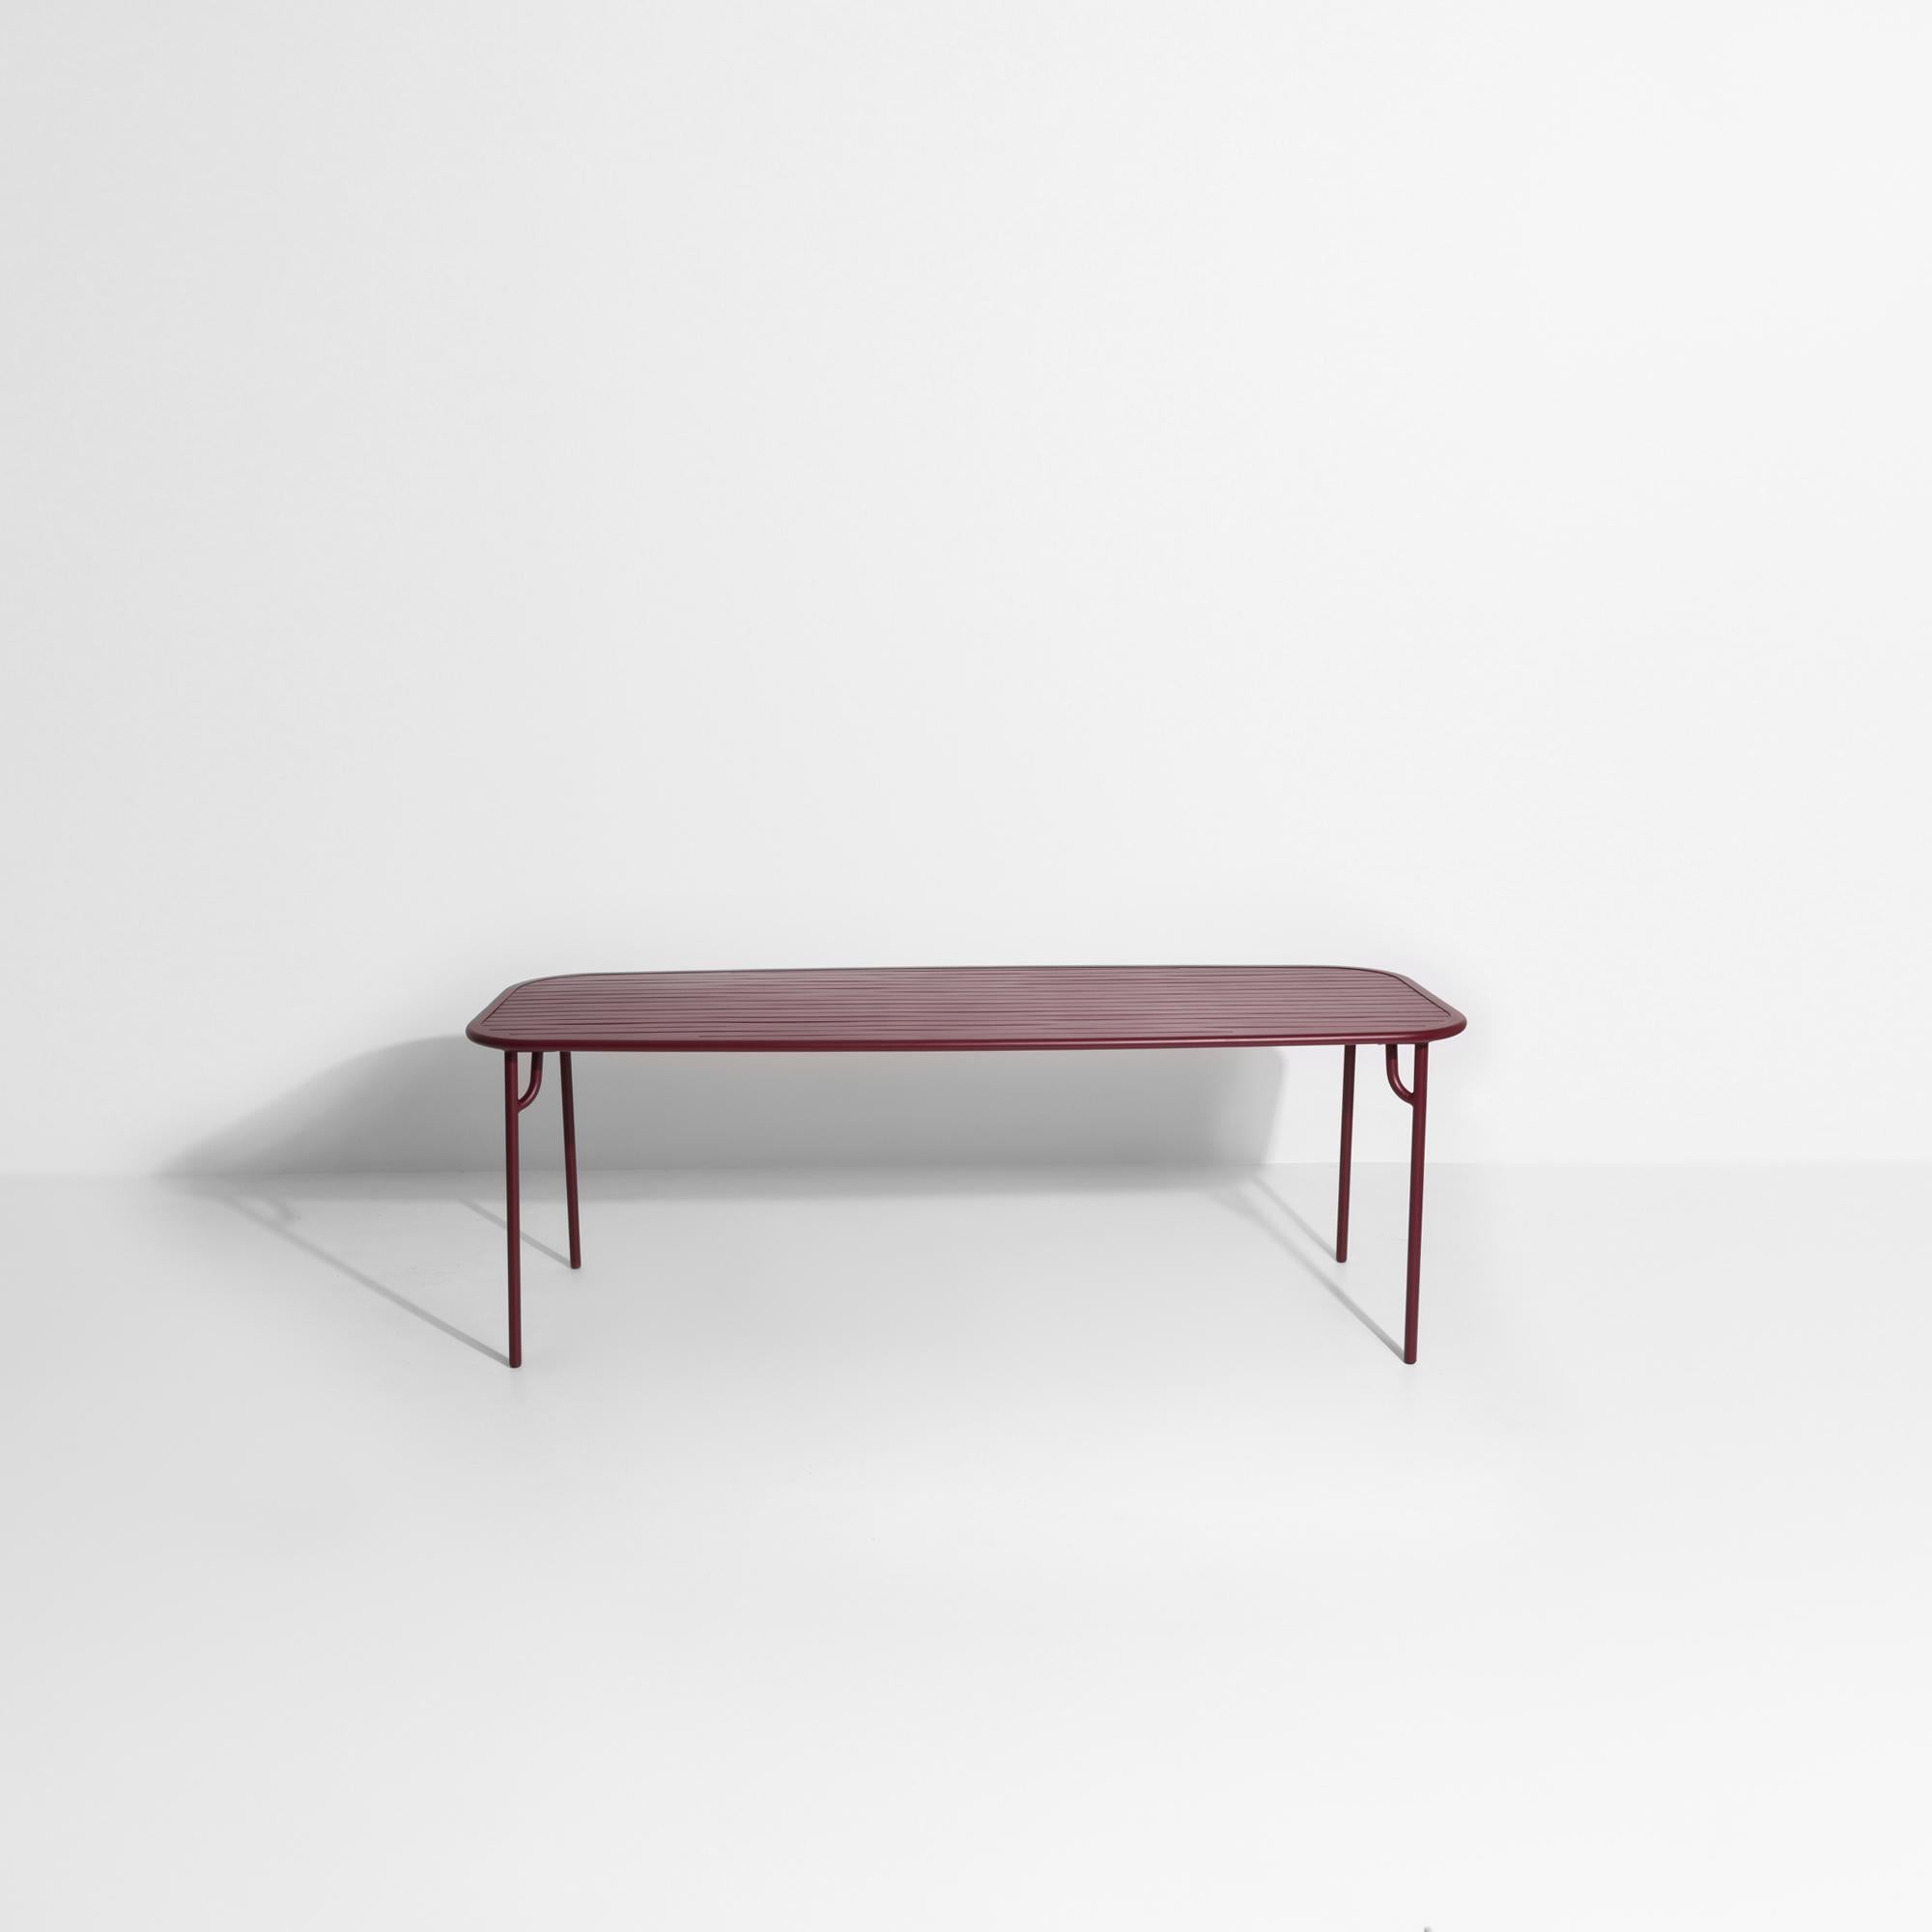 Petite Friture Week-End Large Rectangular Dining Table in Burgundy with Slats  In New Condition For Sale In Brooklyn, NY